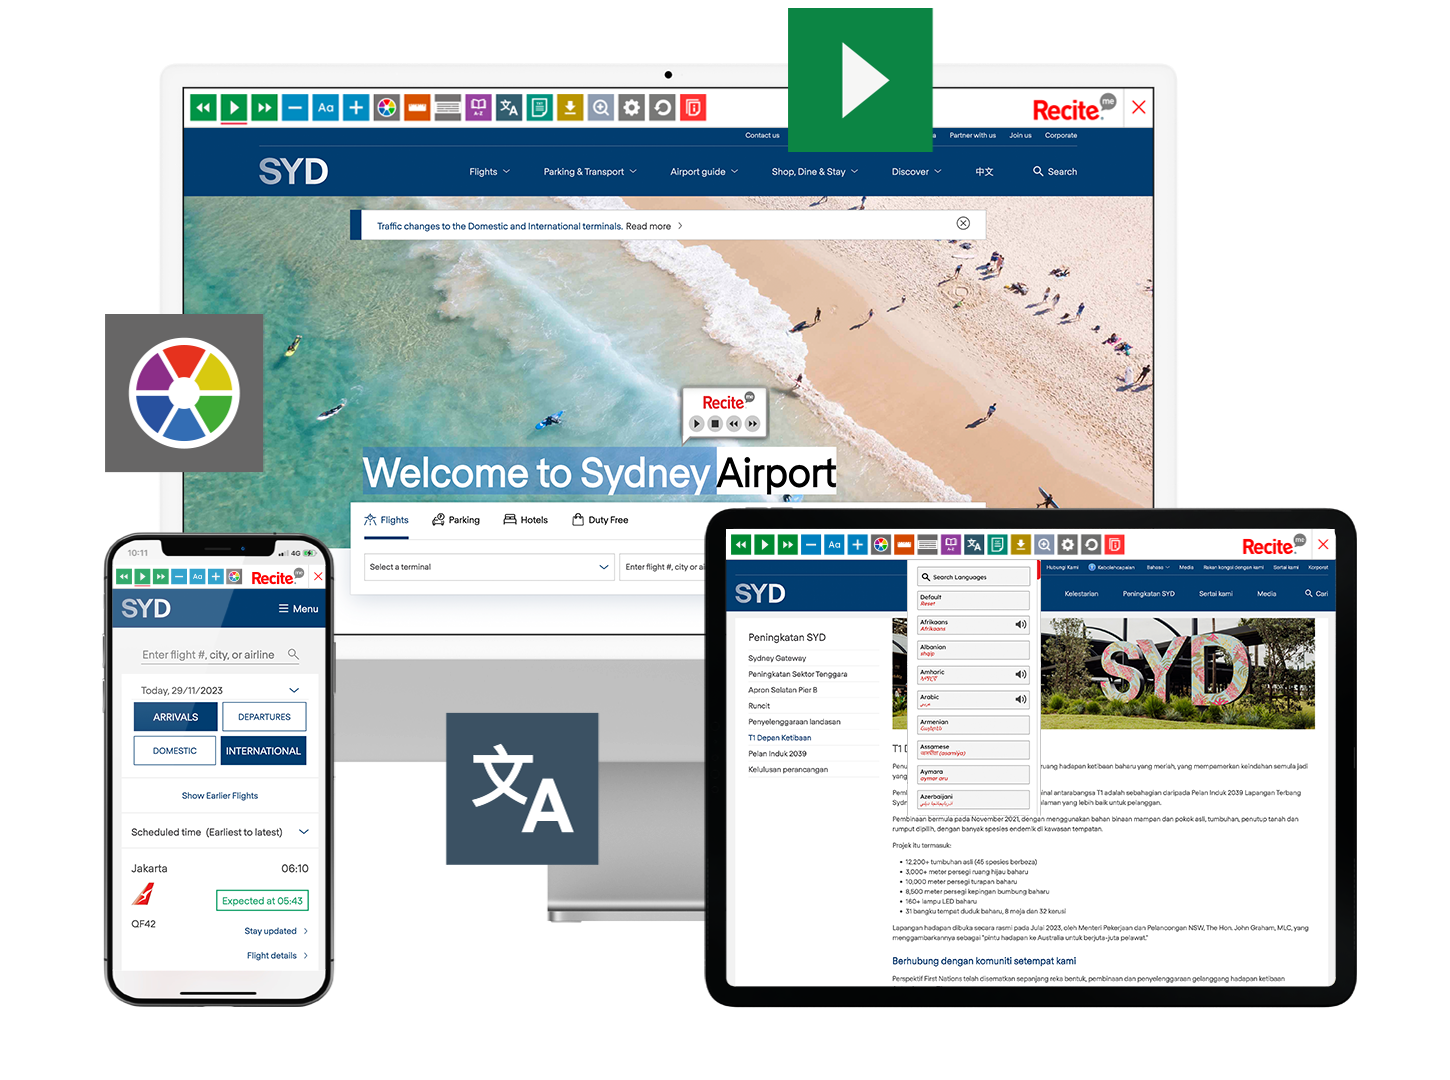 Mock-up of the Recite Me toolbar being used on the Sydney Airport website